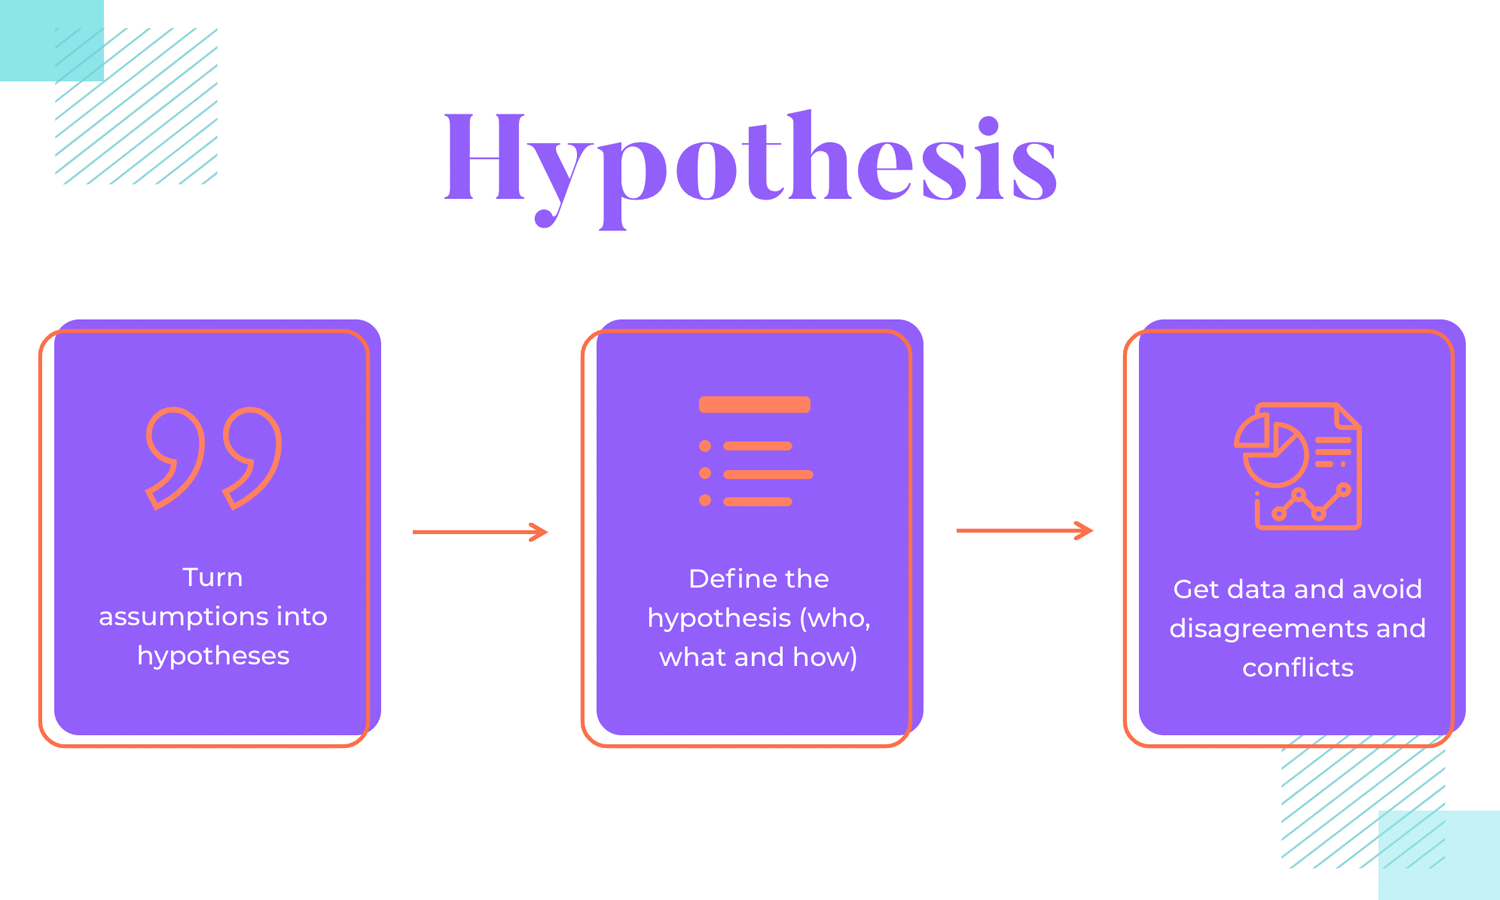 Defining and testing hypothesis in lean UX